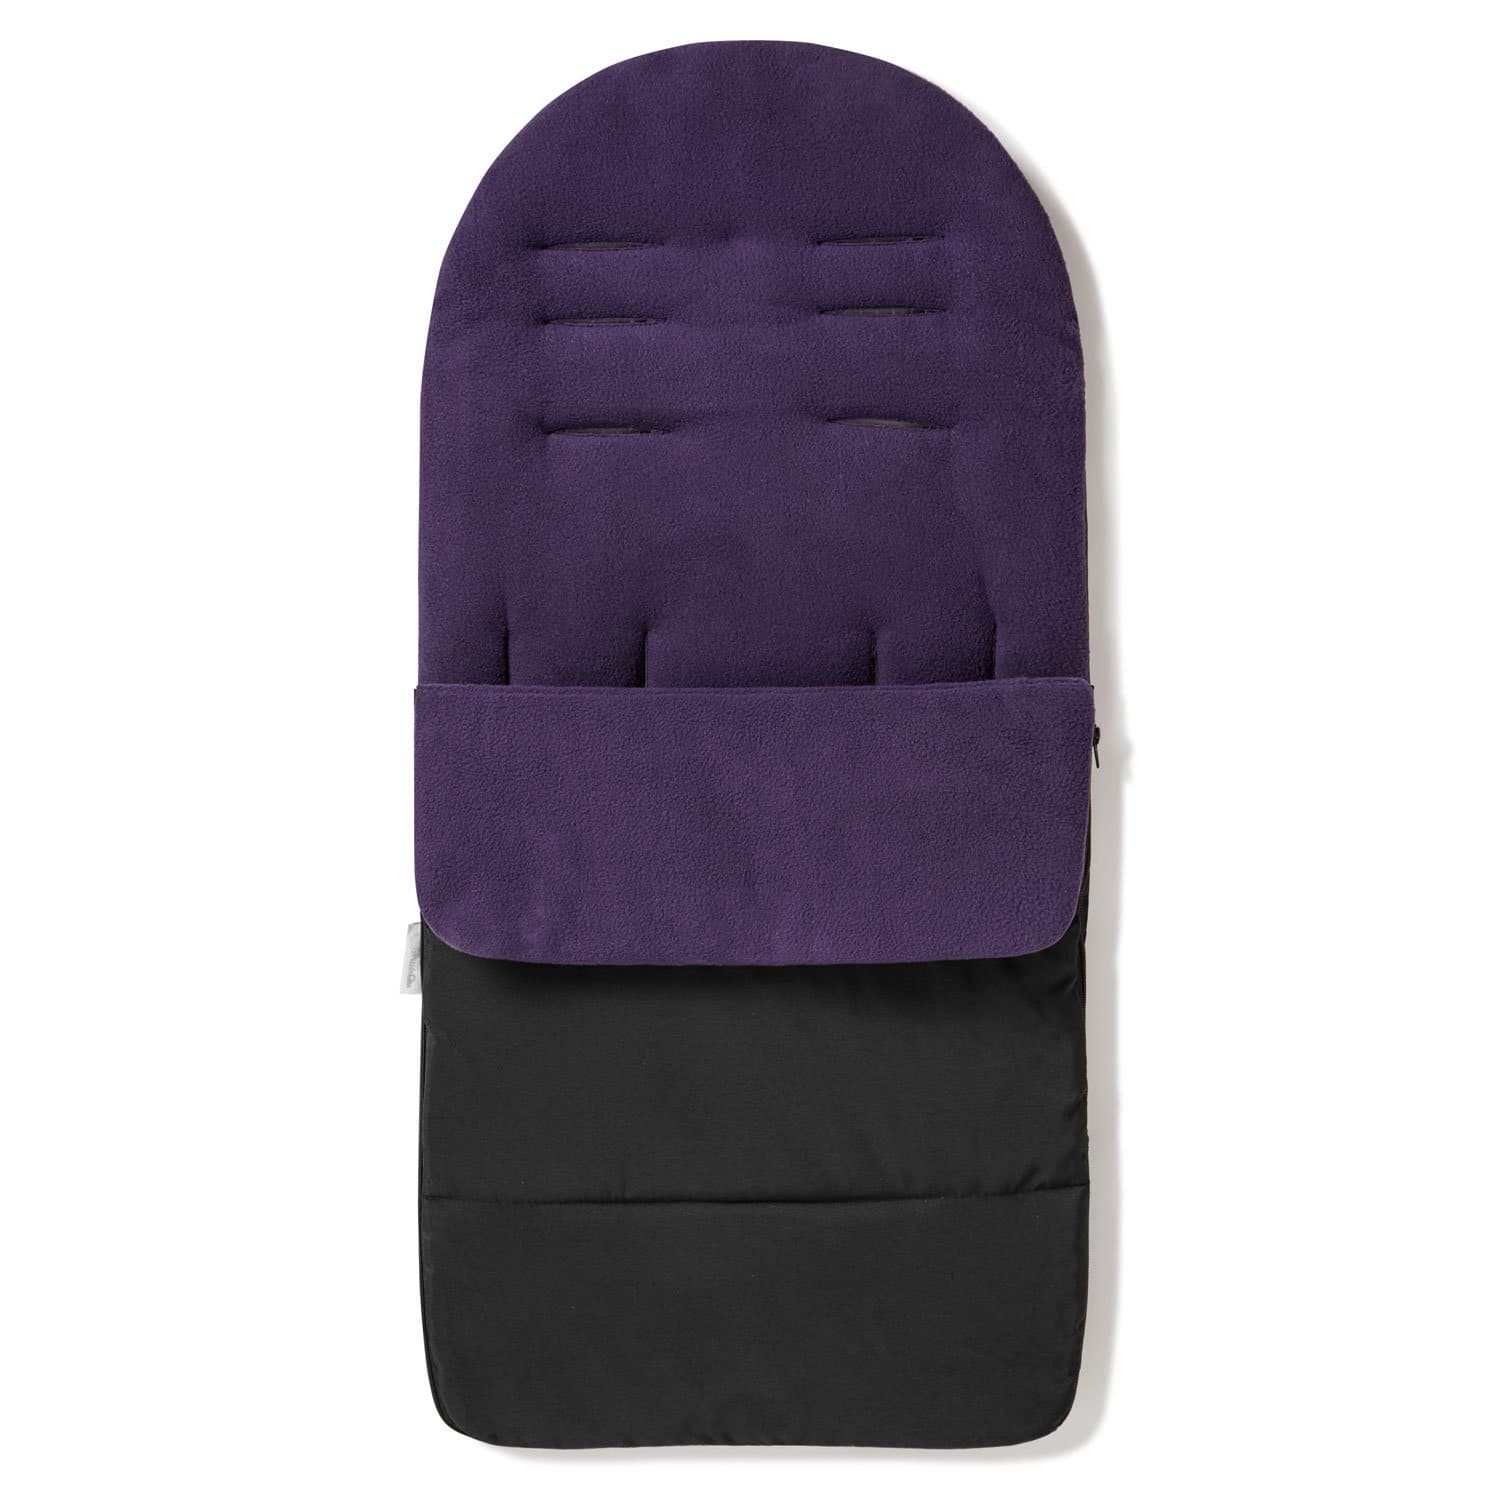 Premium Footmuff / Cosy Toes Compatible with Mutsy - Plum Purple / Fits All Models | For Your Little One